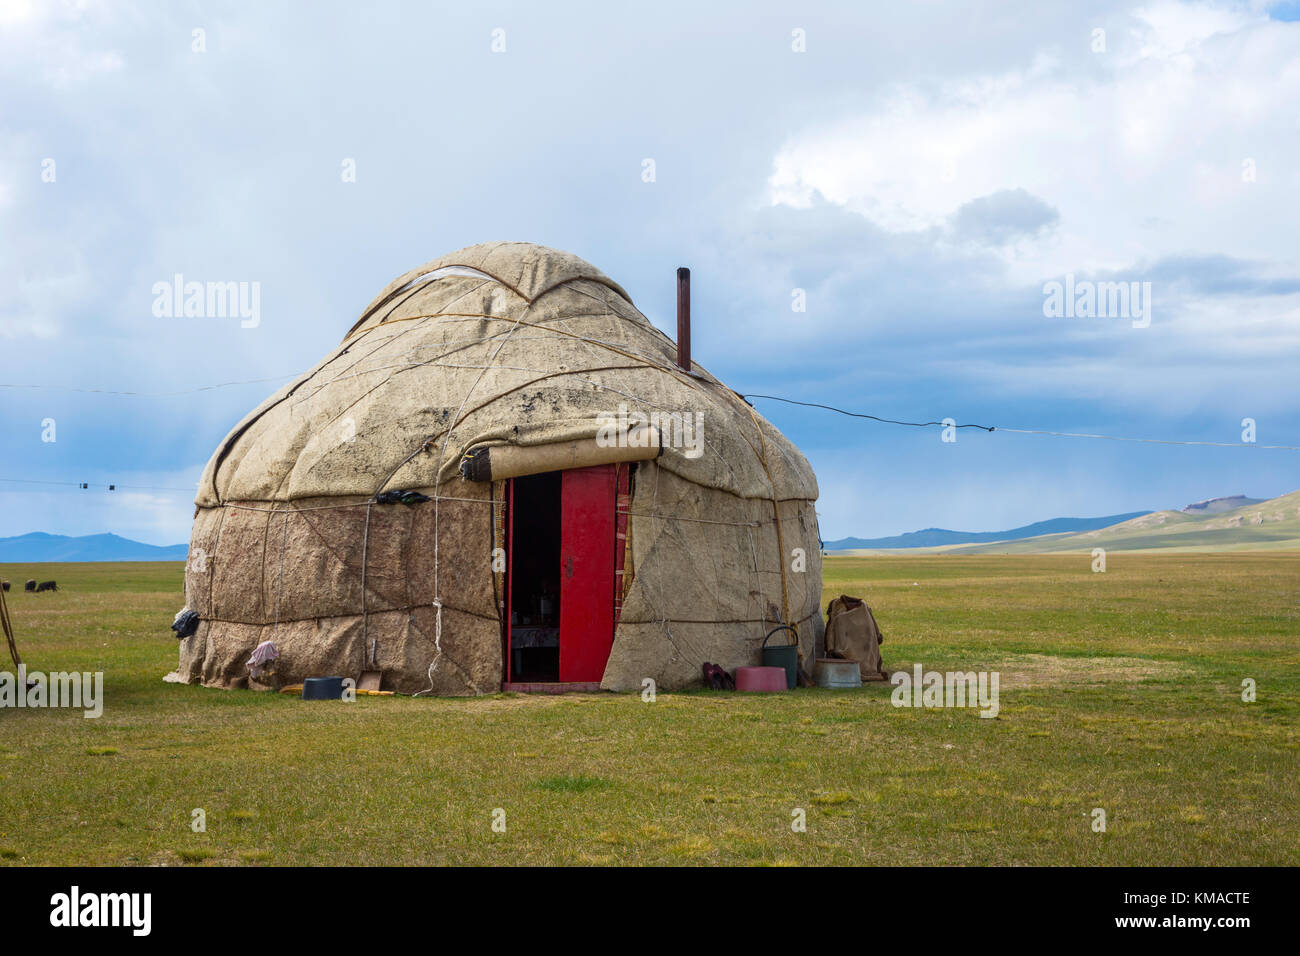 Yurt, typical nomad houses by the Song Kul lake, Kyrgyzstan Stock Photo